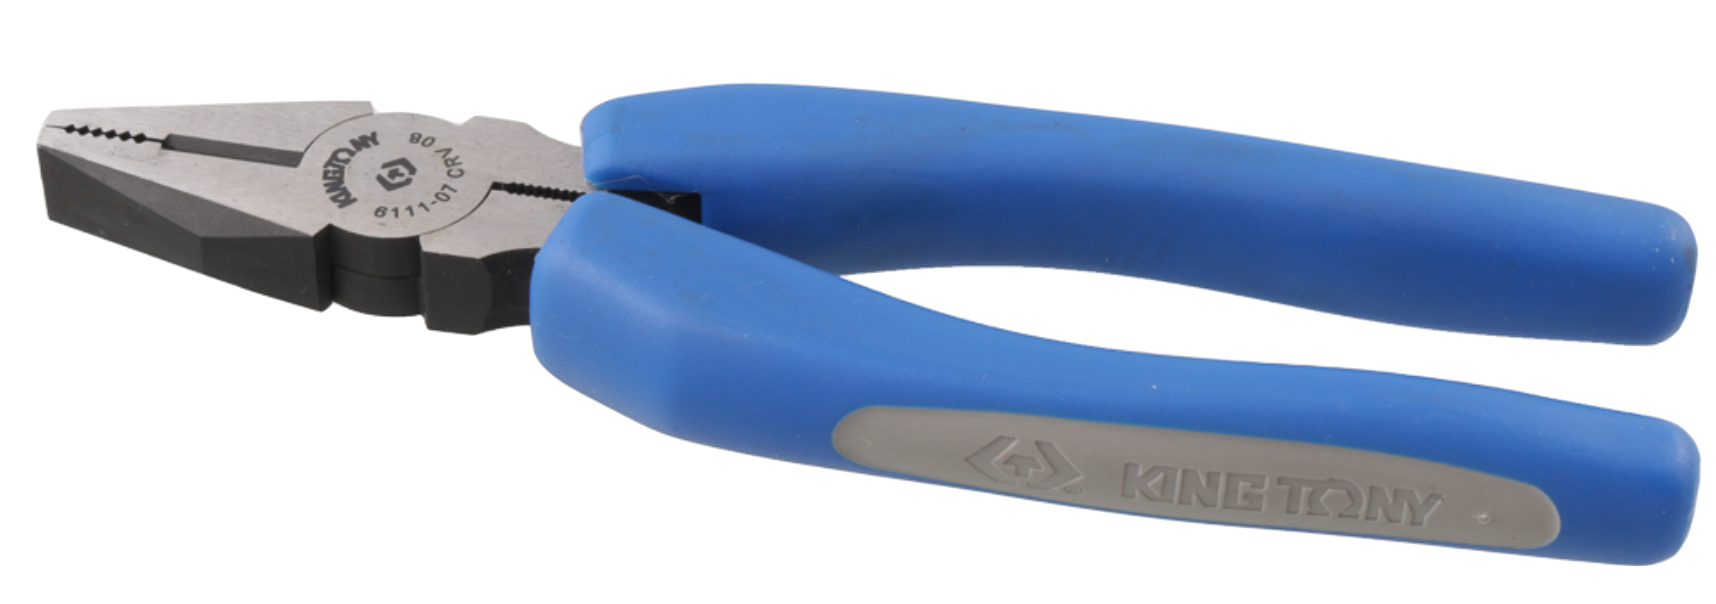 Standard_pliers_kt_pro_tools.png